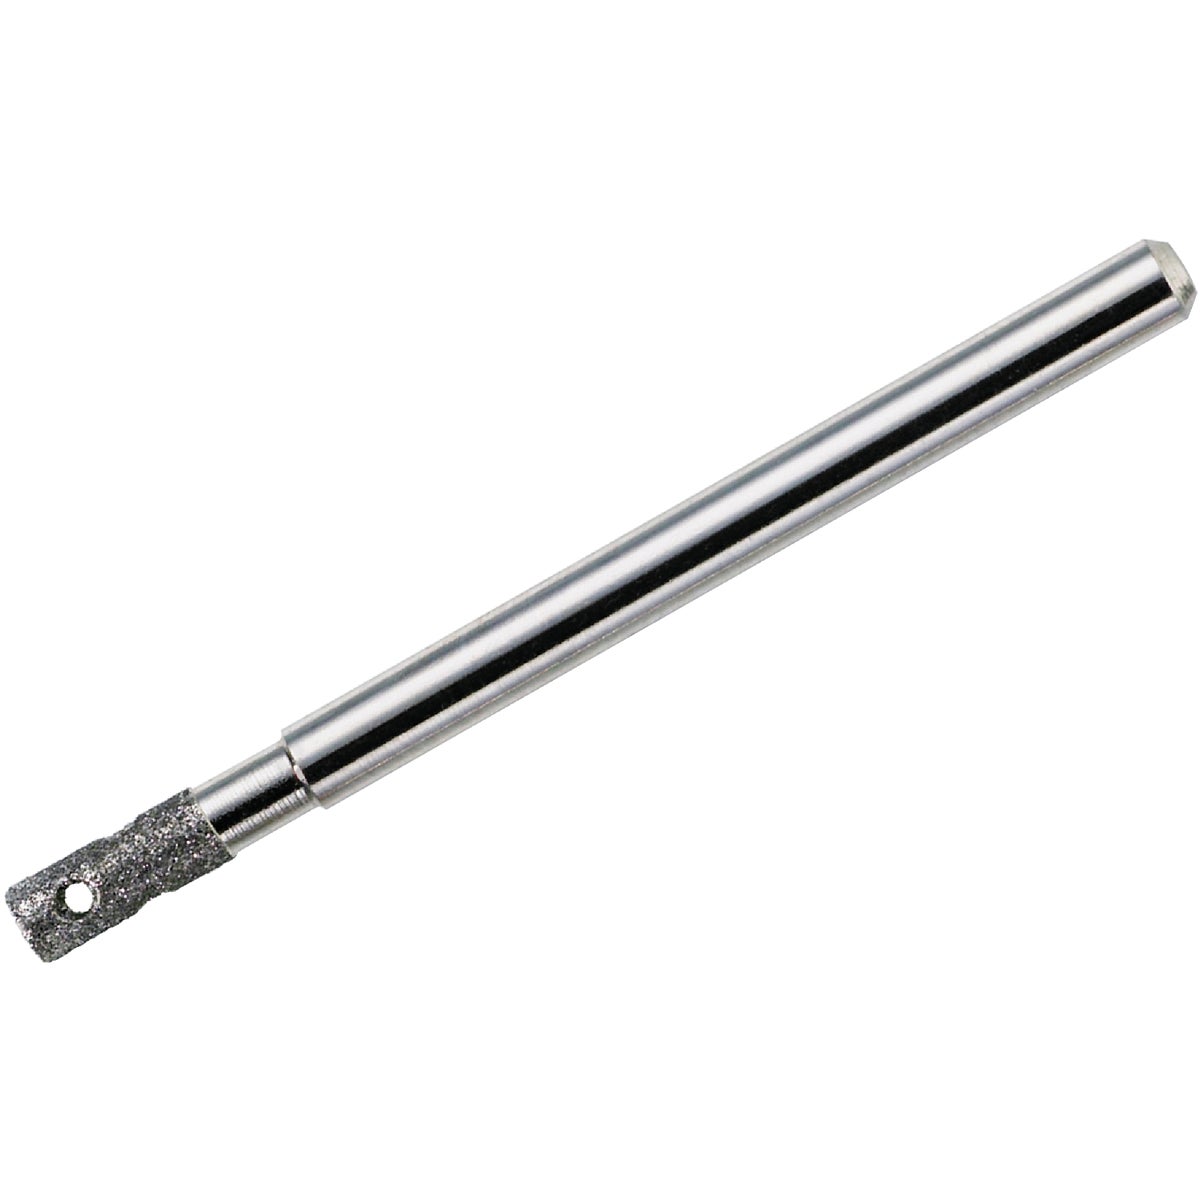 Item 300177, For use with the Dremel rotary tool to drill glass, ceramic wall tile, 